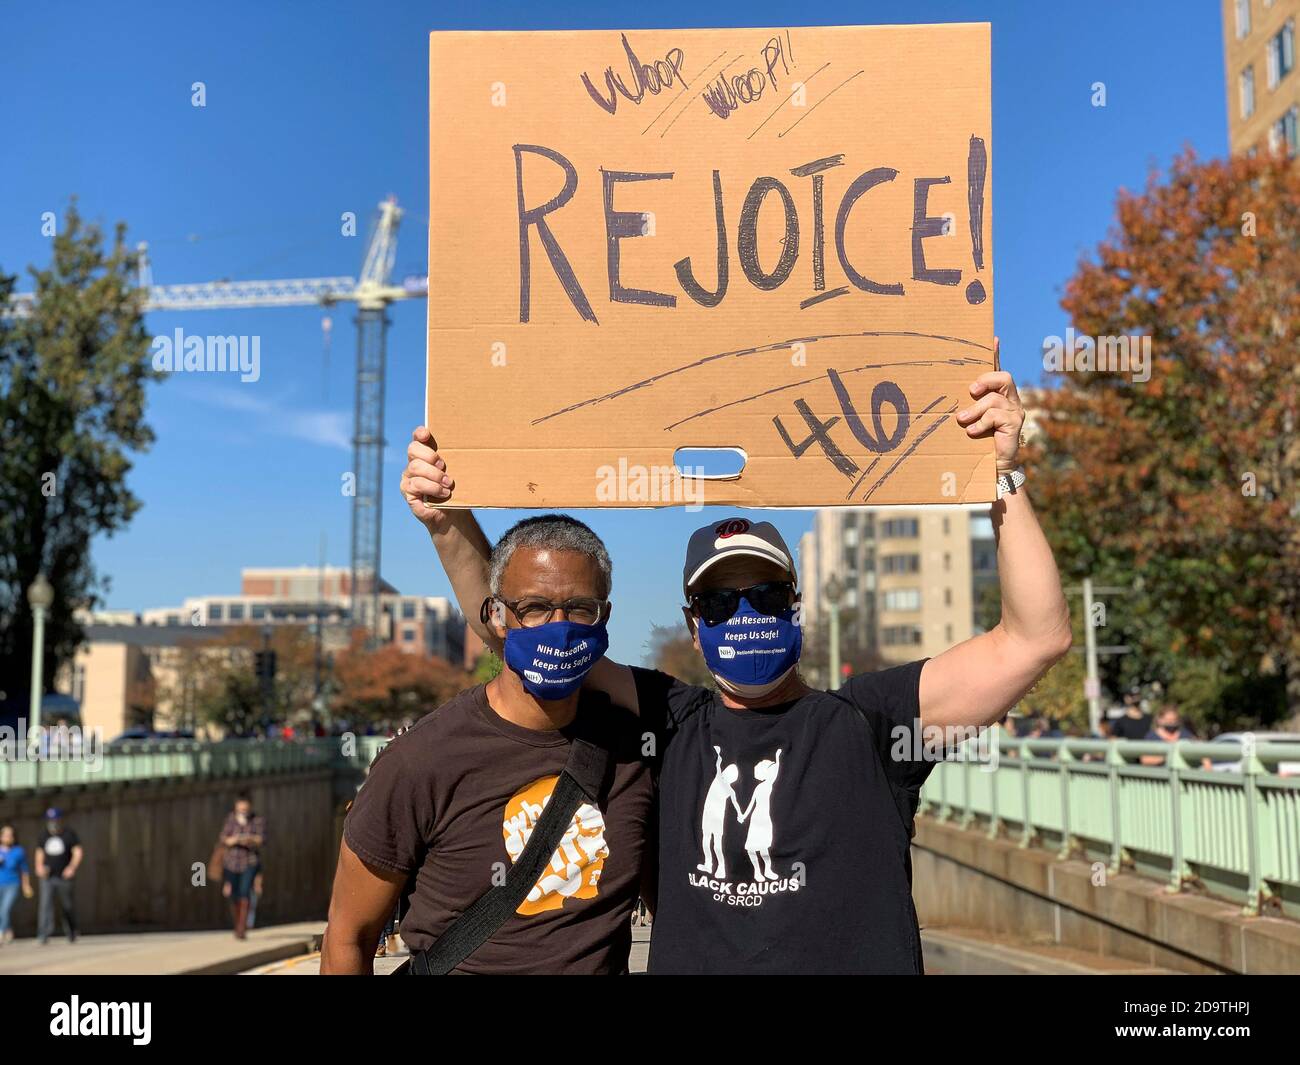 Washington, District of Columbia, USA. 7th Nov, 2020. Daryl Anderson and Jerry Overman walk towards the celebration in Black Lives Matter Plaza following the announcement that the Biden-Harris ticket won the election. They have one simple word: 'RejoiceÃ Credit: Sue Dorfman/ZUMA Wire/Alamy Live News Stock Photo